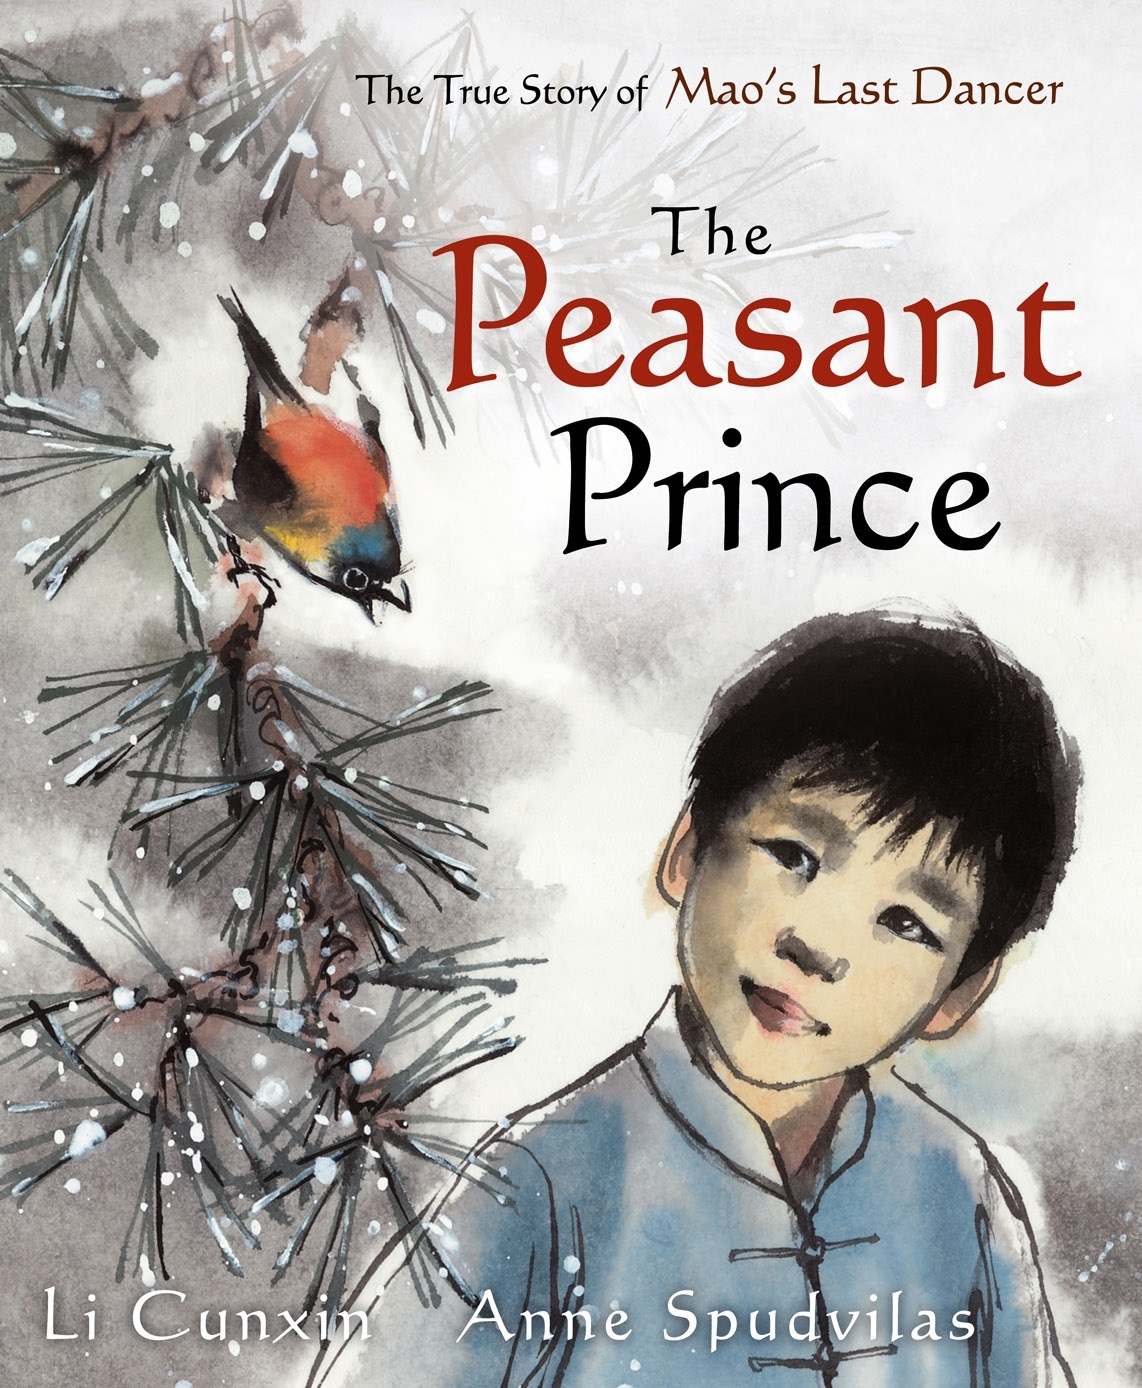 Boy observing a robyn in a snowy tree on the cover of The Peasant Prince